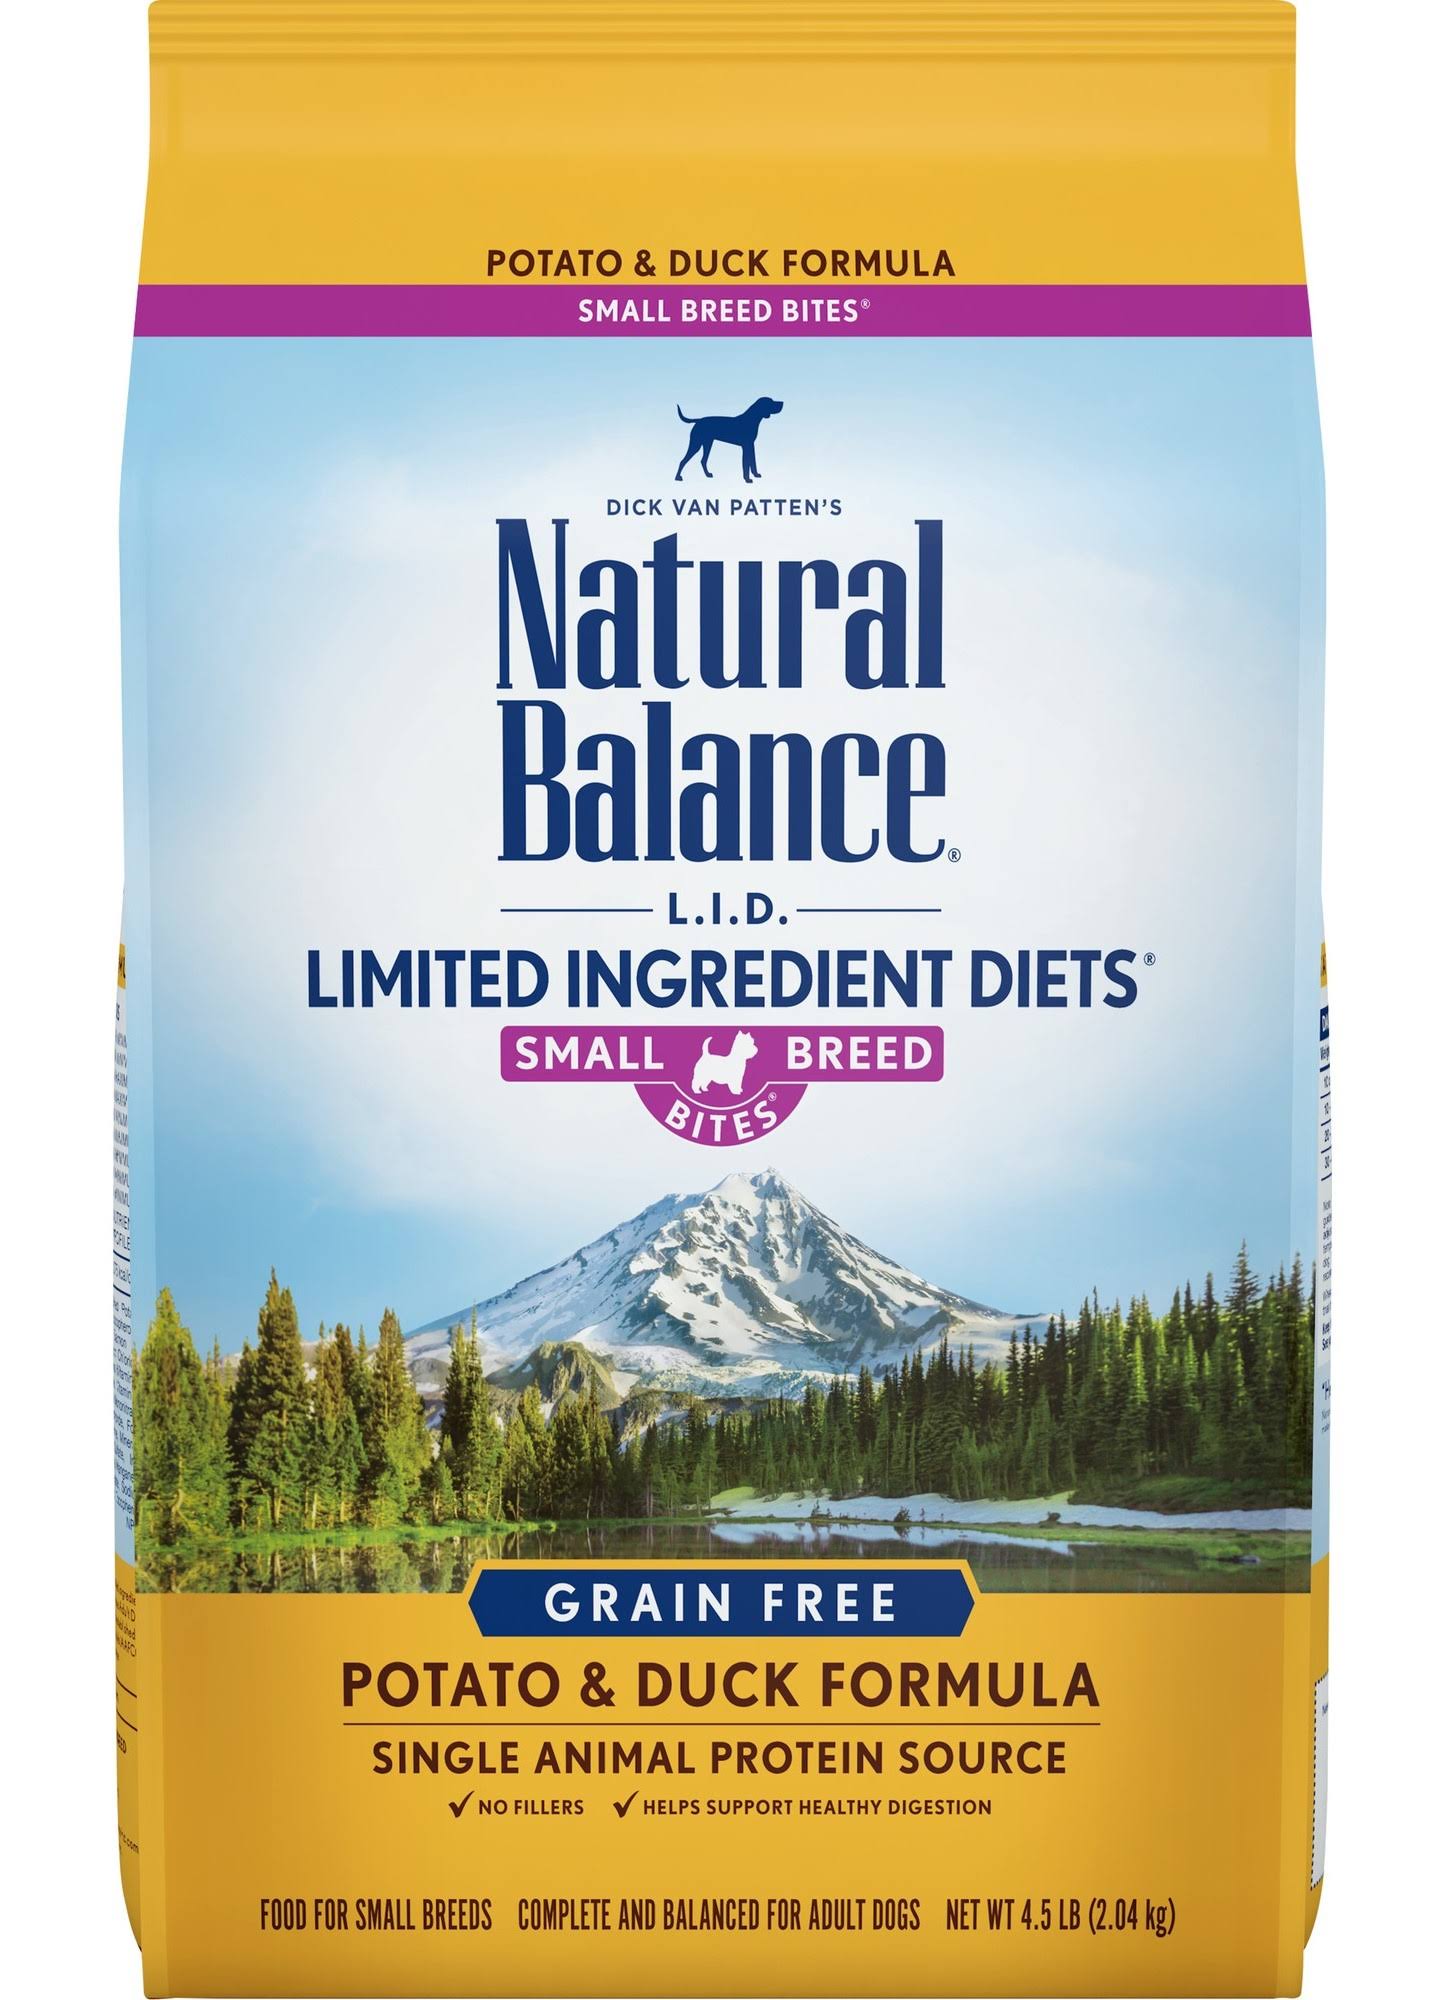 Natural Balance Small Breed Bites Limited Ingredient Diet Dog Food - Potato and Duck Formula, Dry, 12lb